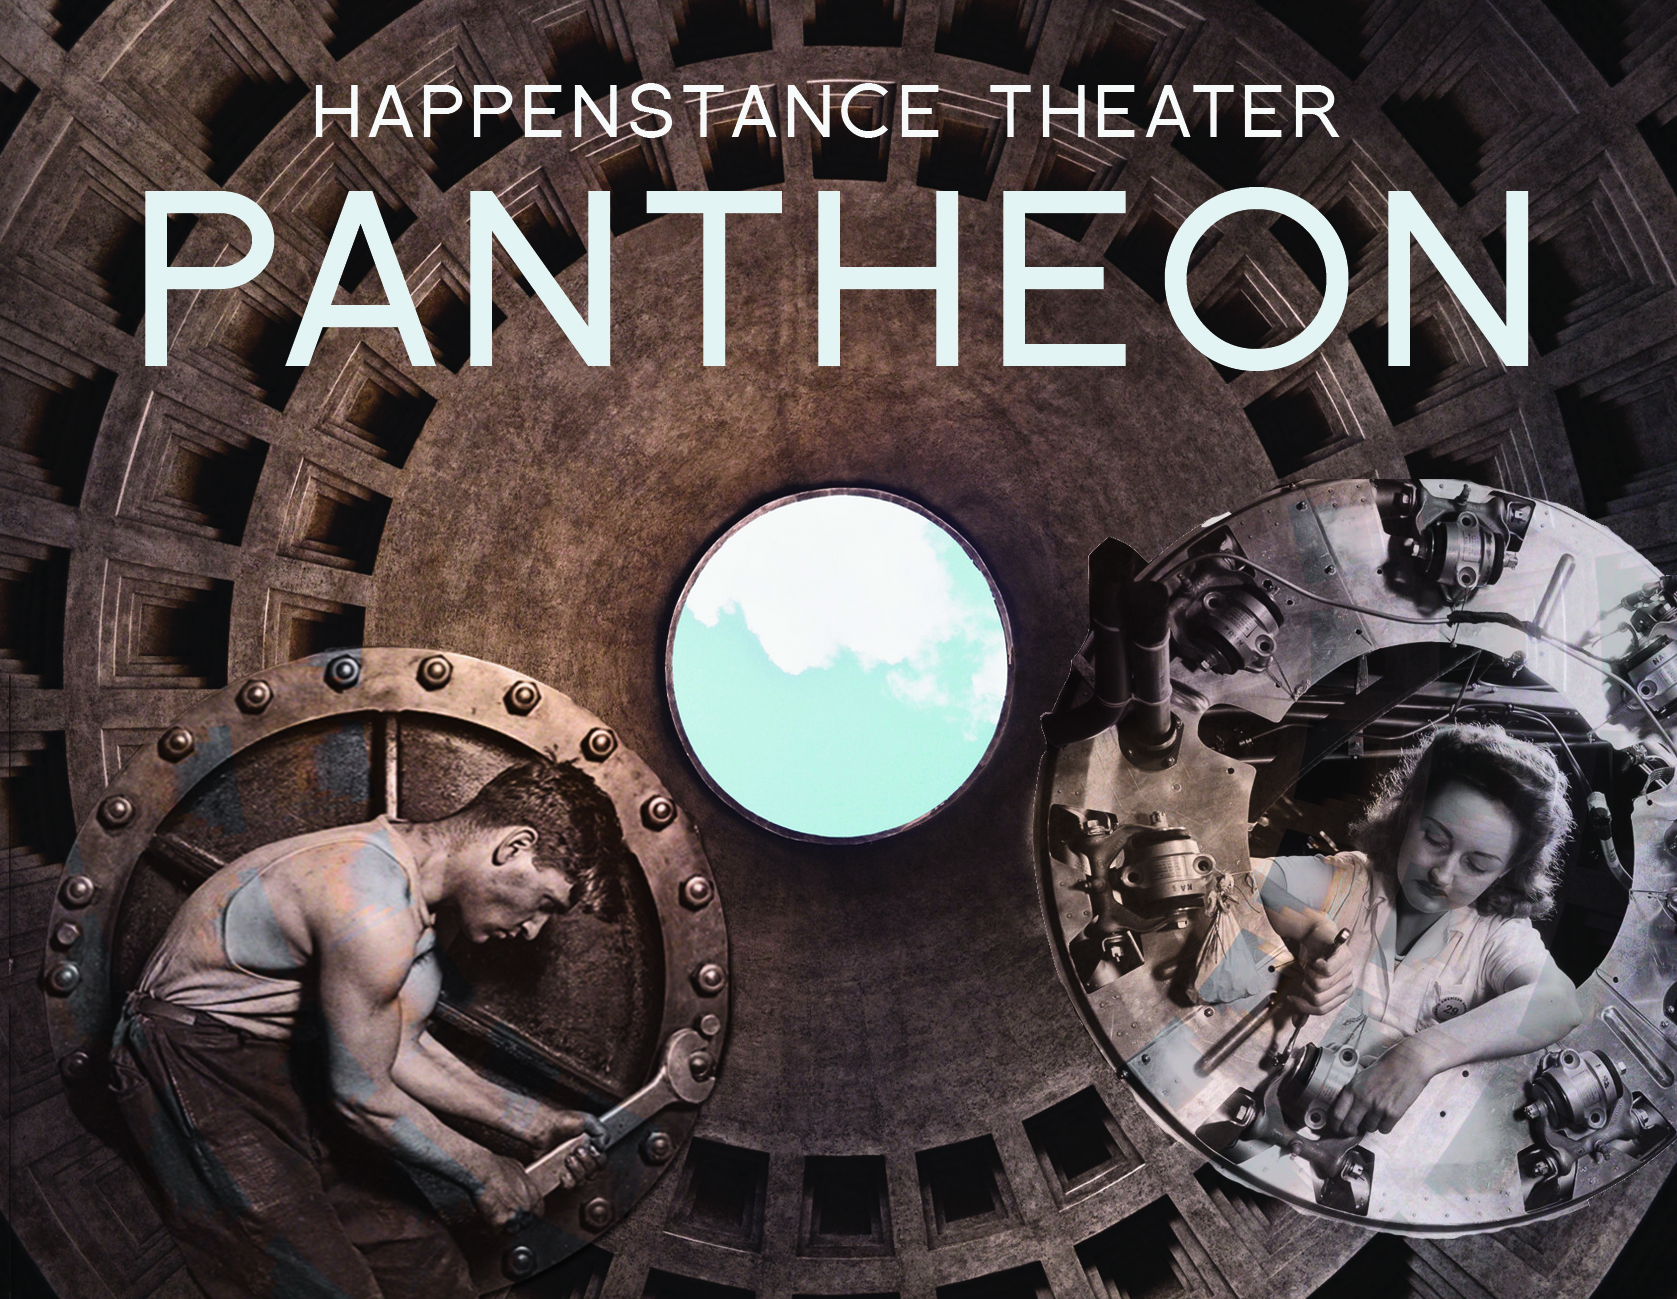 Promotional piece for Pantheon by Happenstance Theater